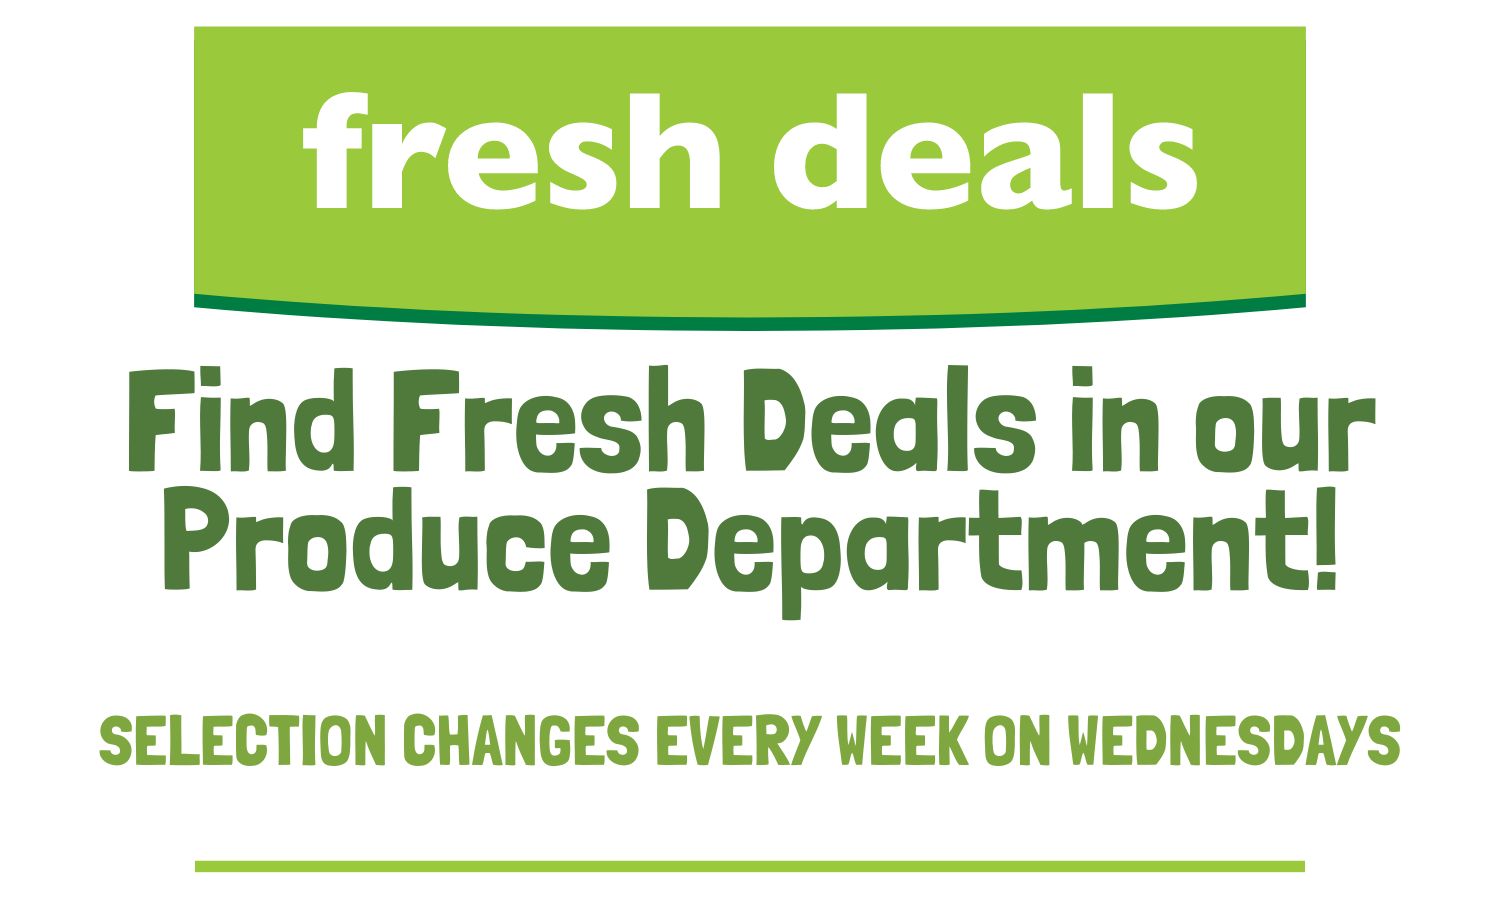 New Fresh Deals Every Wednesday